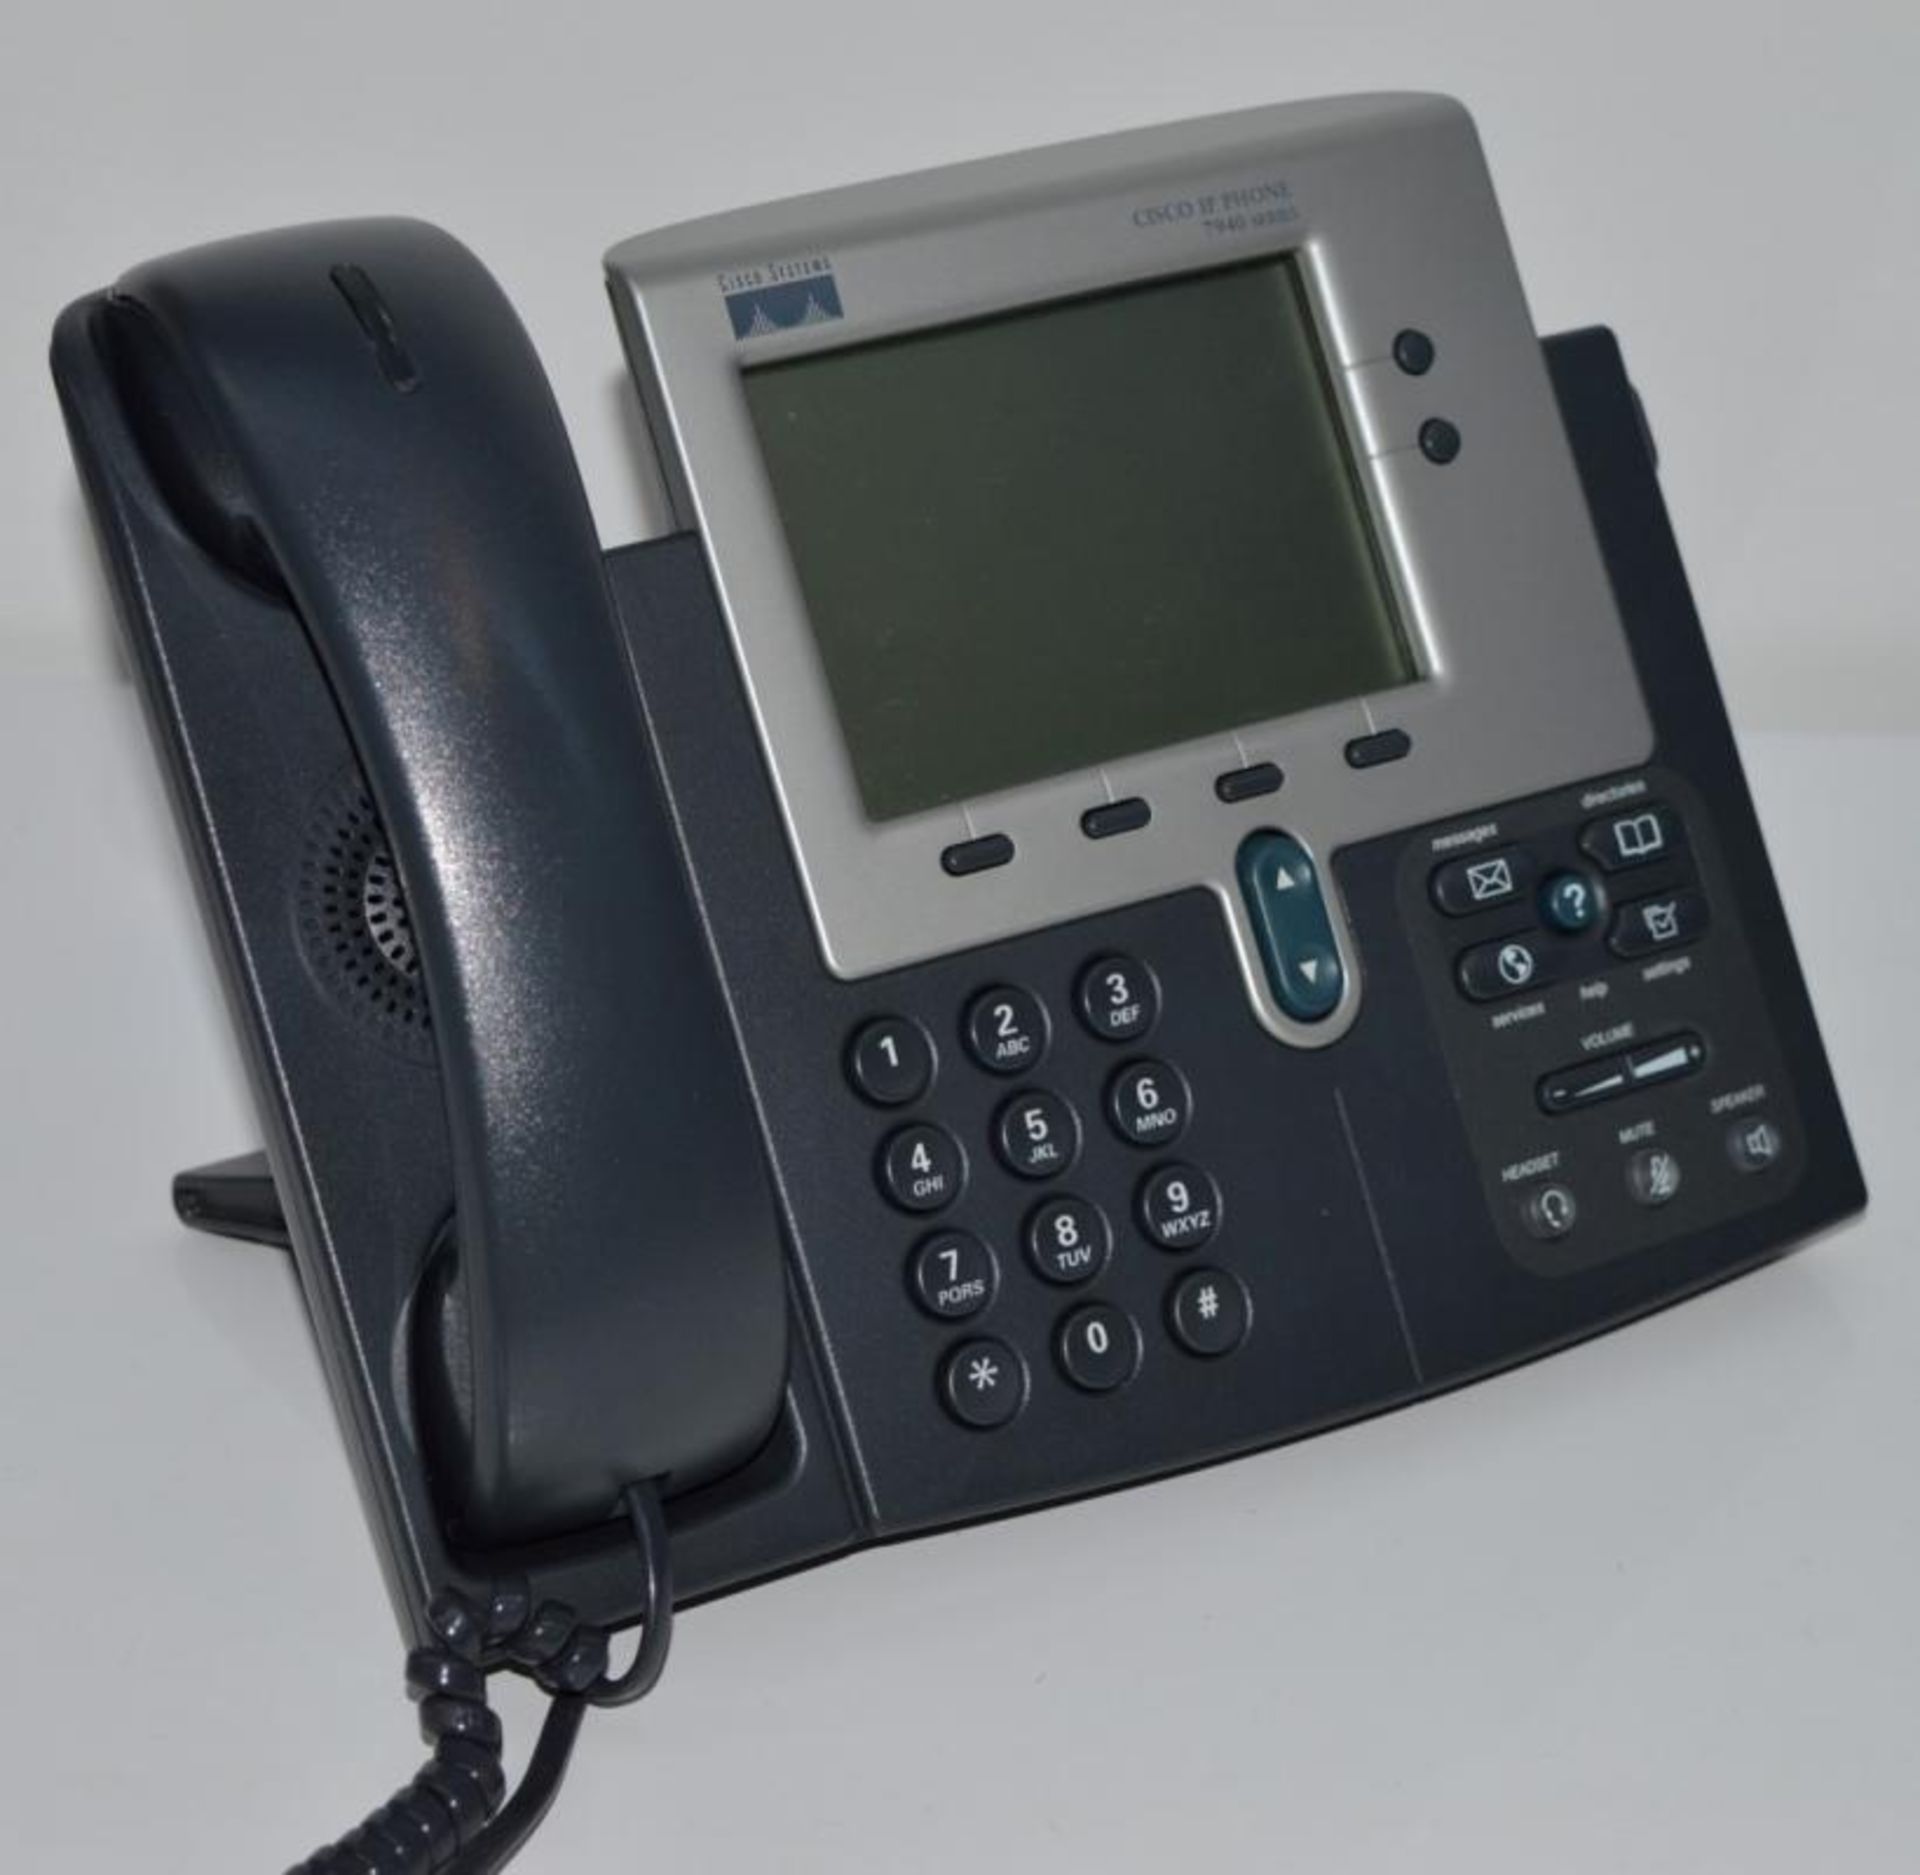 4 x Cisco CP-7940G IP Phone VOIP Telephone LCD Display Phones - Removed From a Working Office Enviro - Image 2 of 6